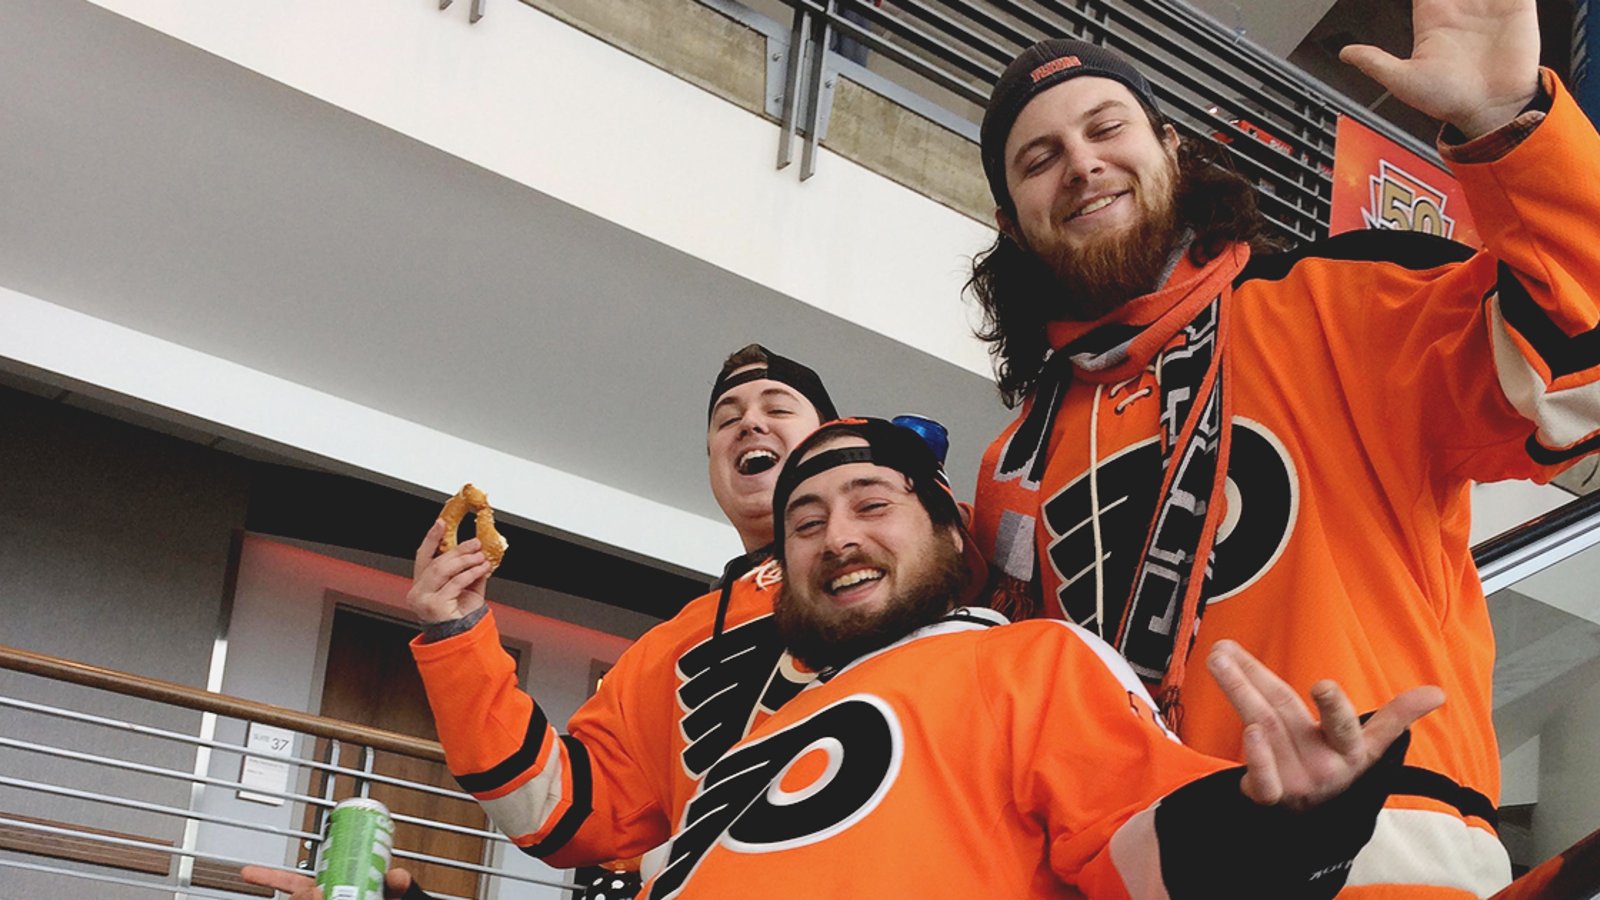 NHL community, two fans need your help to find these men!